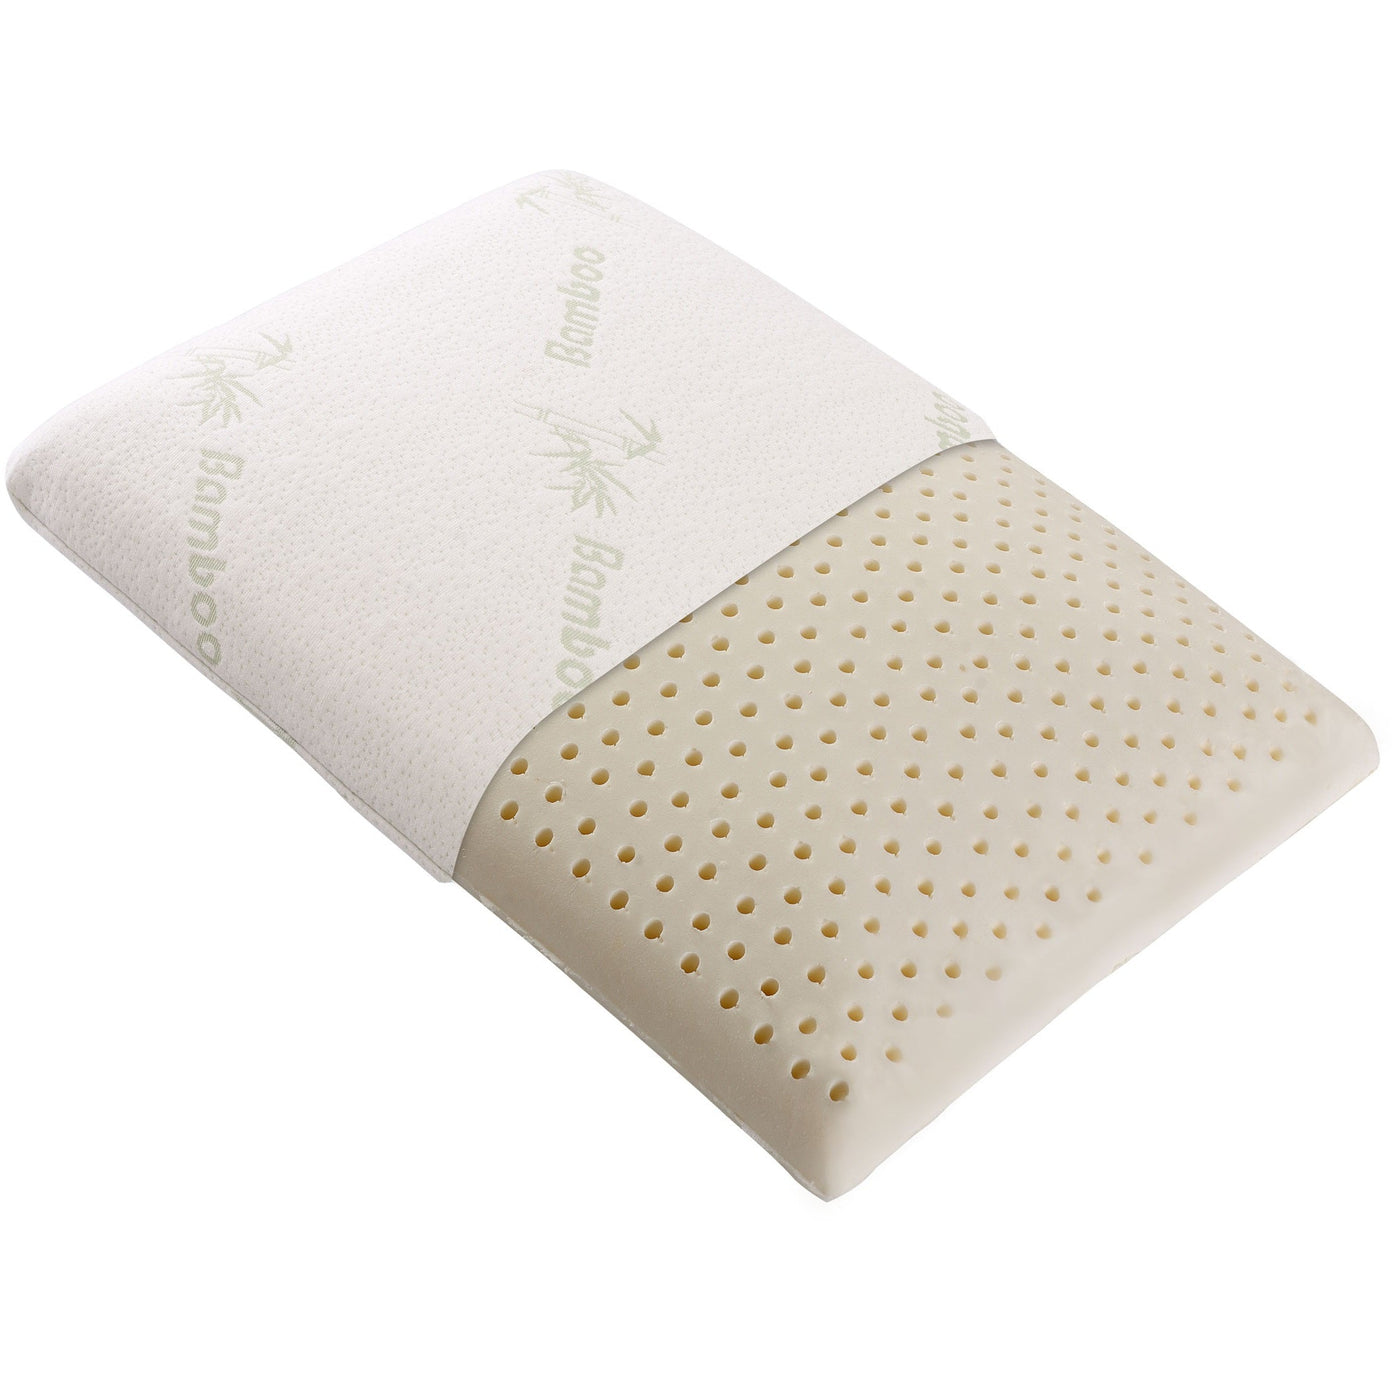 https://www.cheercollection.com/cdn/shop/products/cheer-collection-latex-memory-foam-pillow-466762_1400x.jpg?v=1671779986